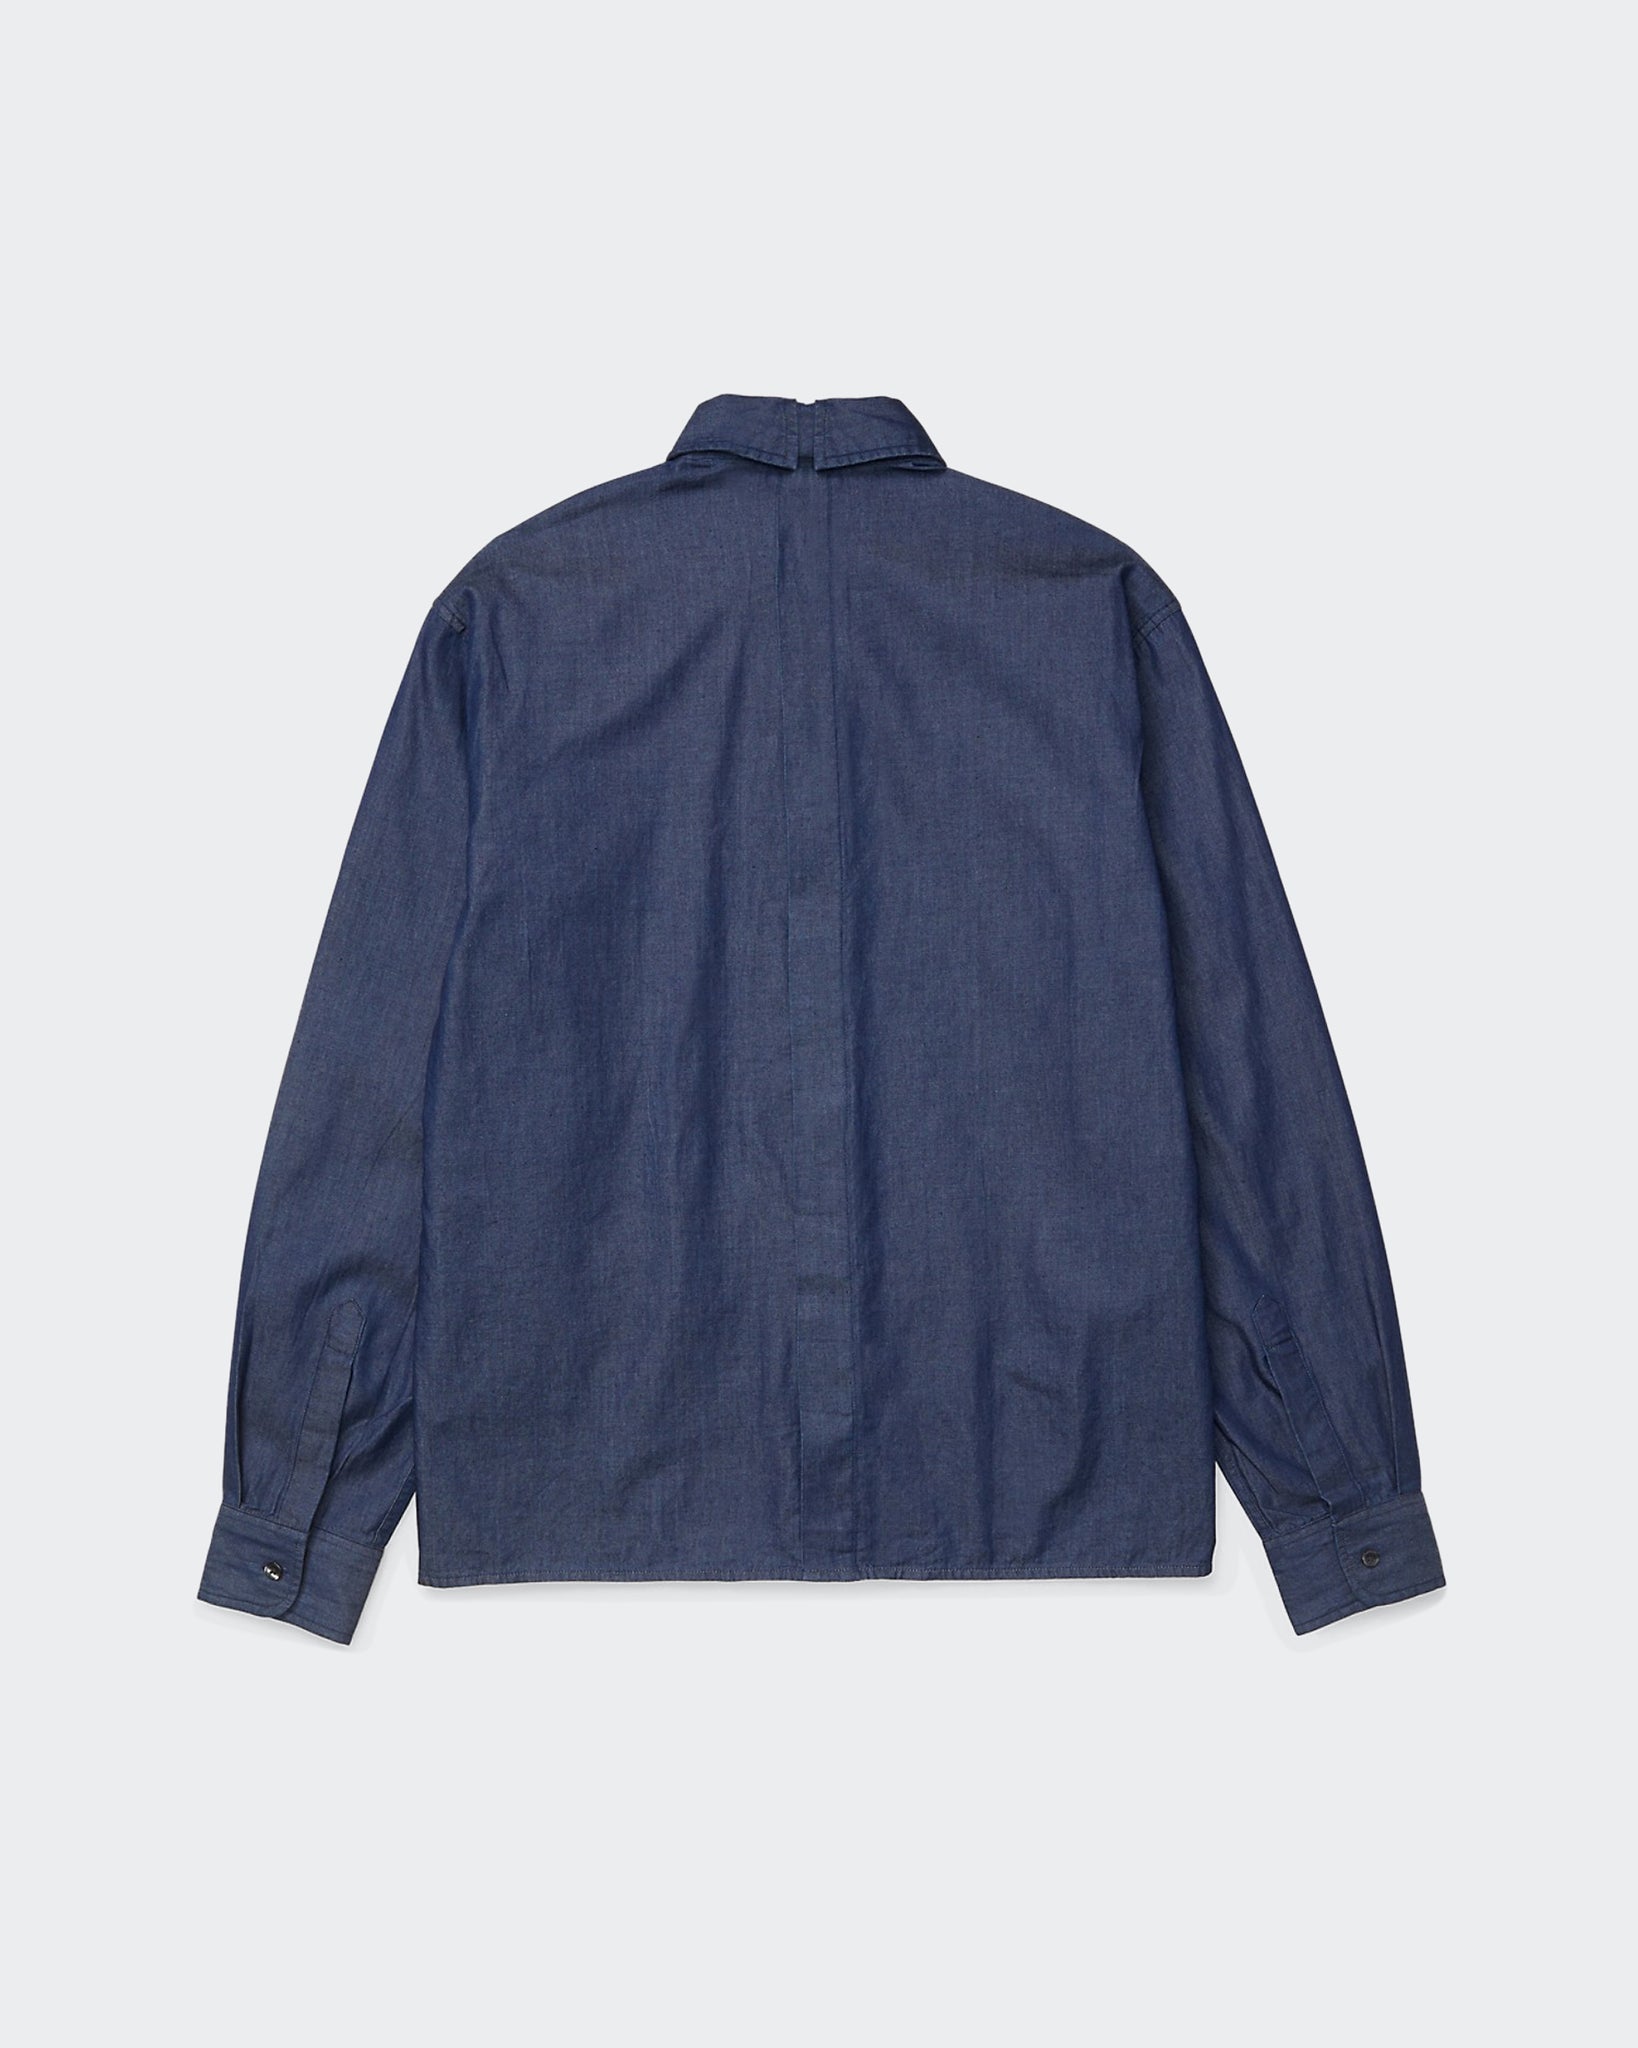 Seated Billy Twill Shirt (Mens) - Navy